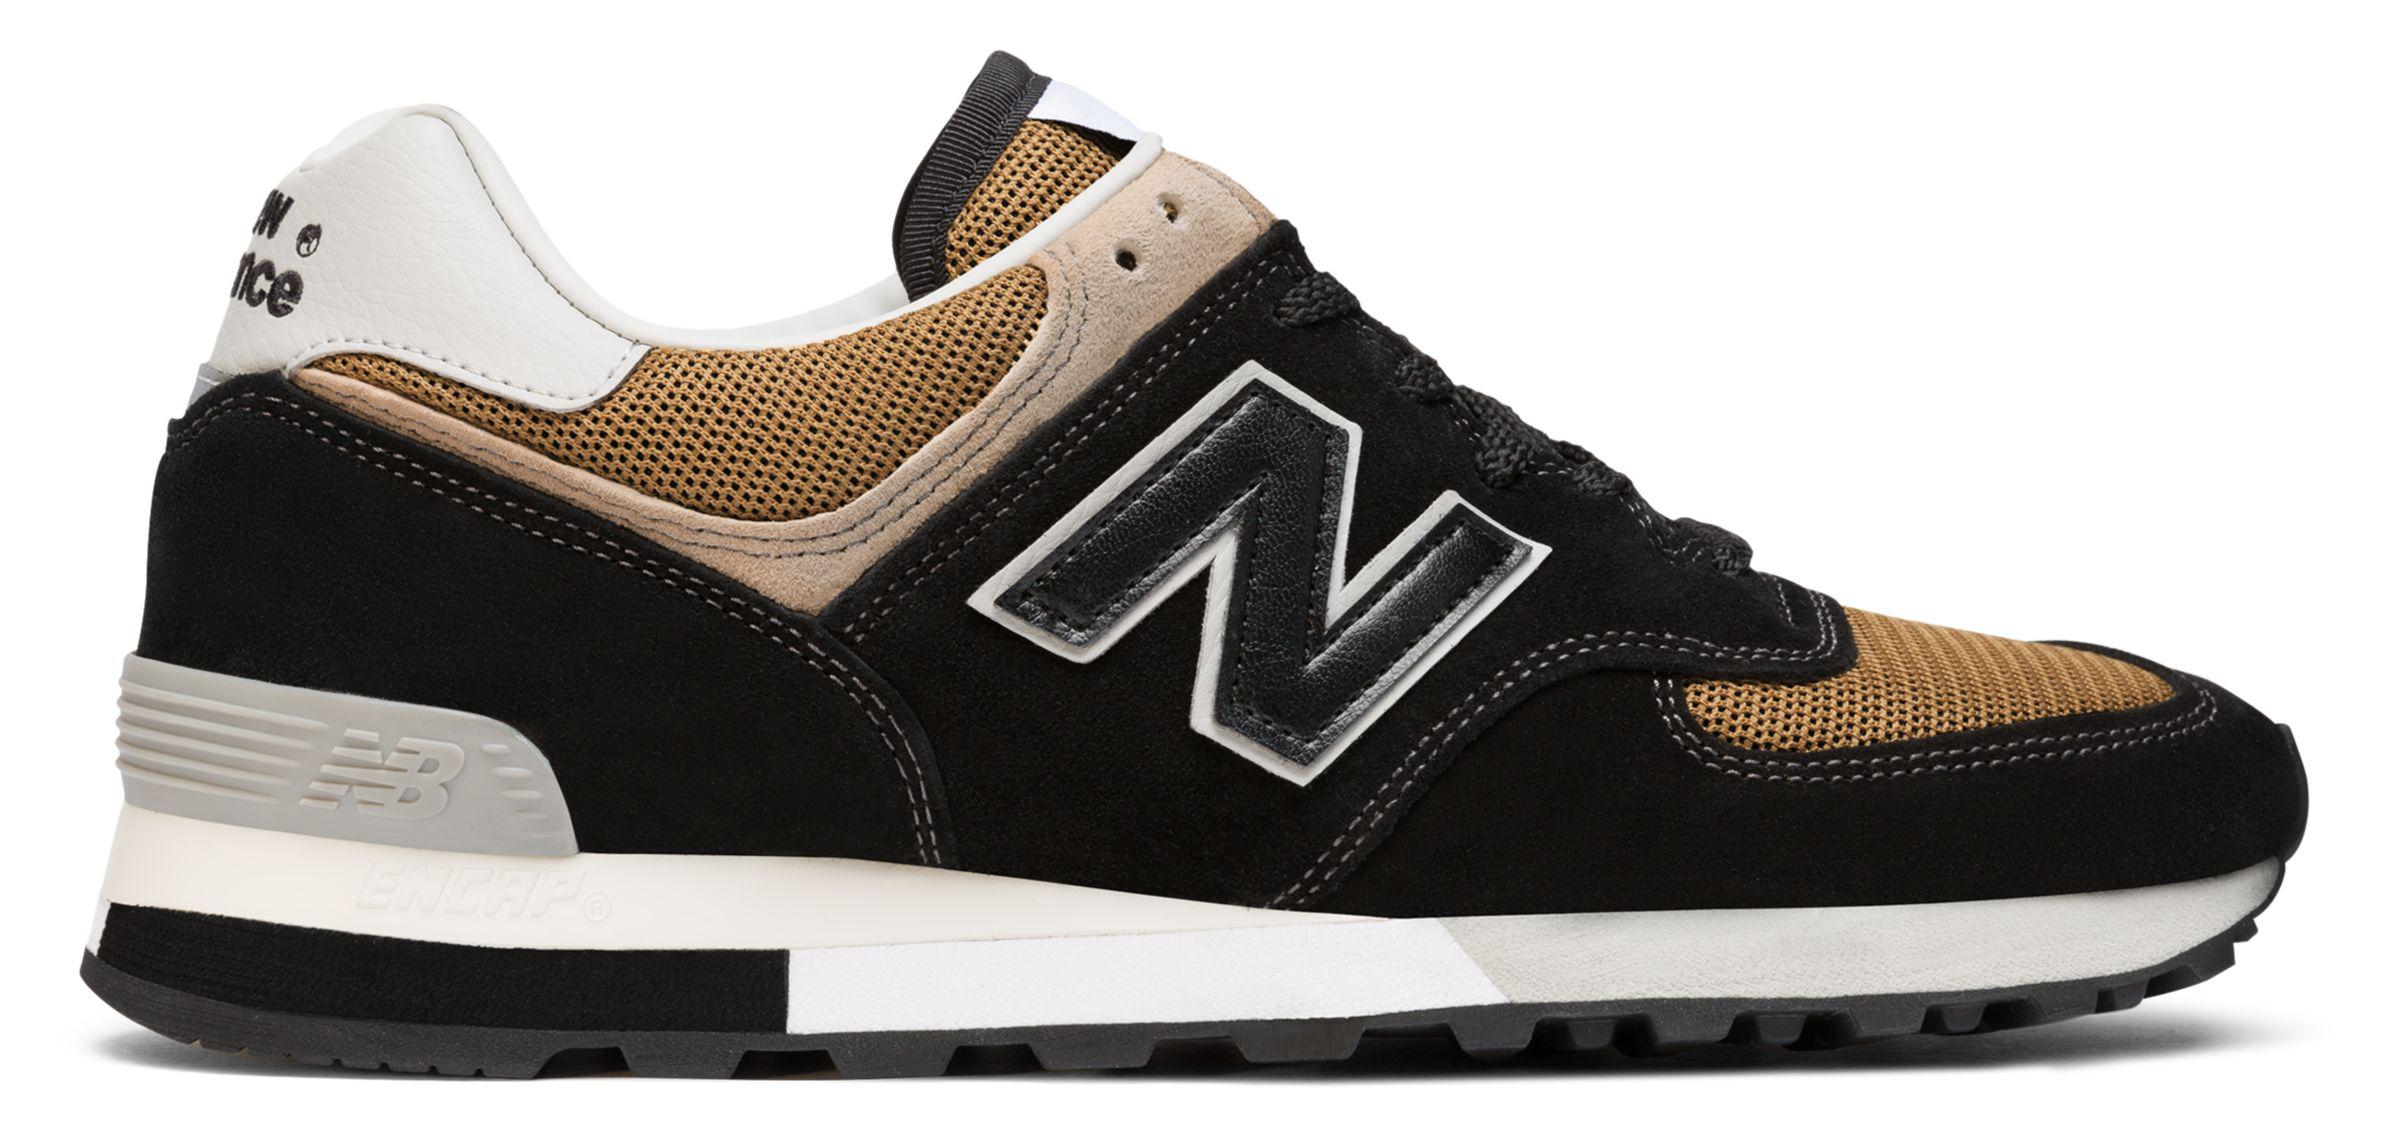 new balance 576 made in england black